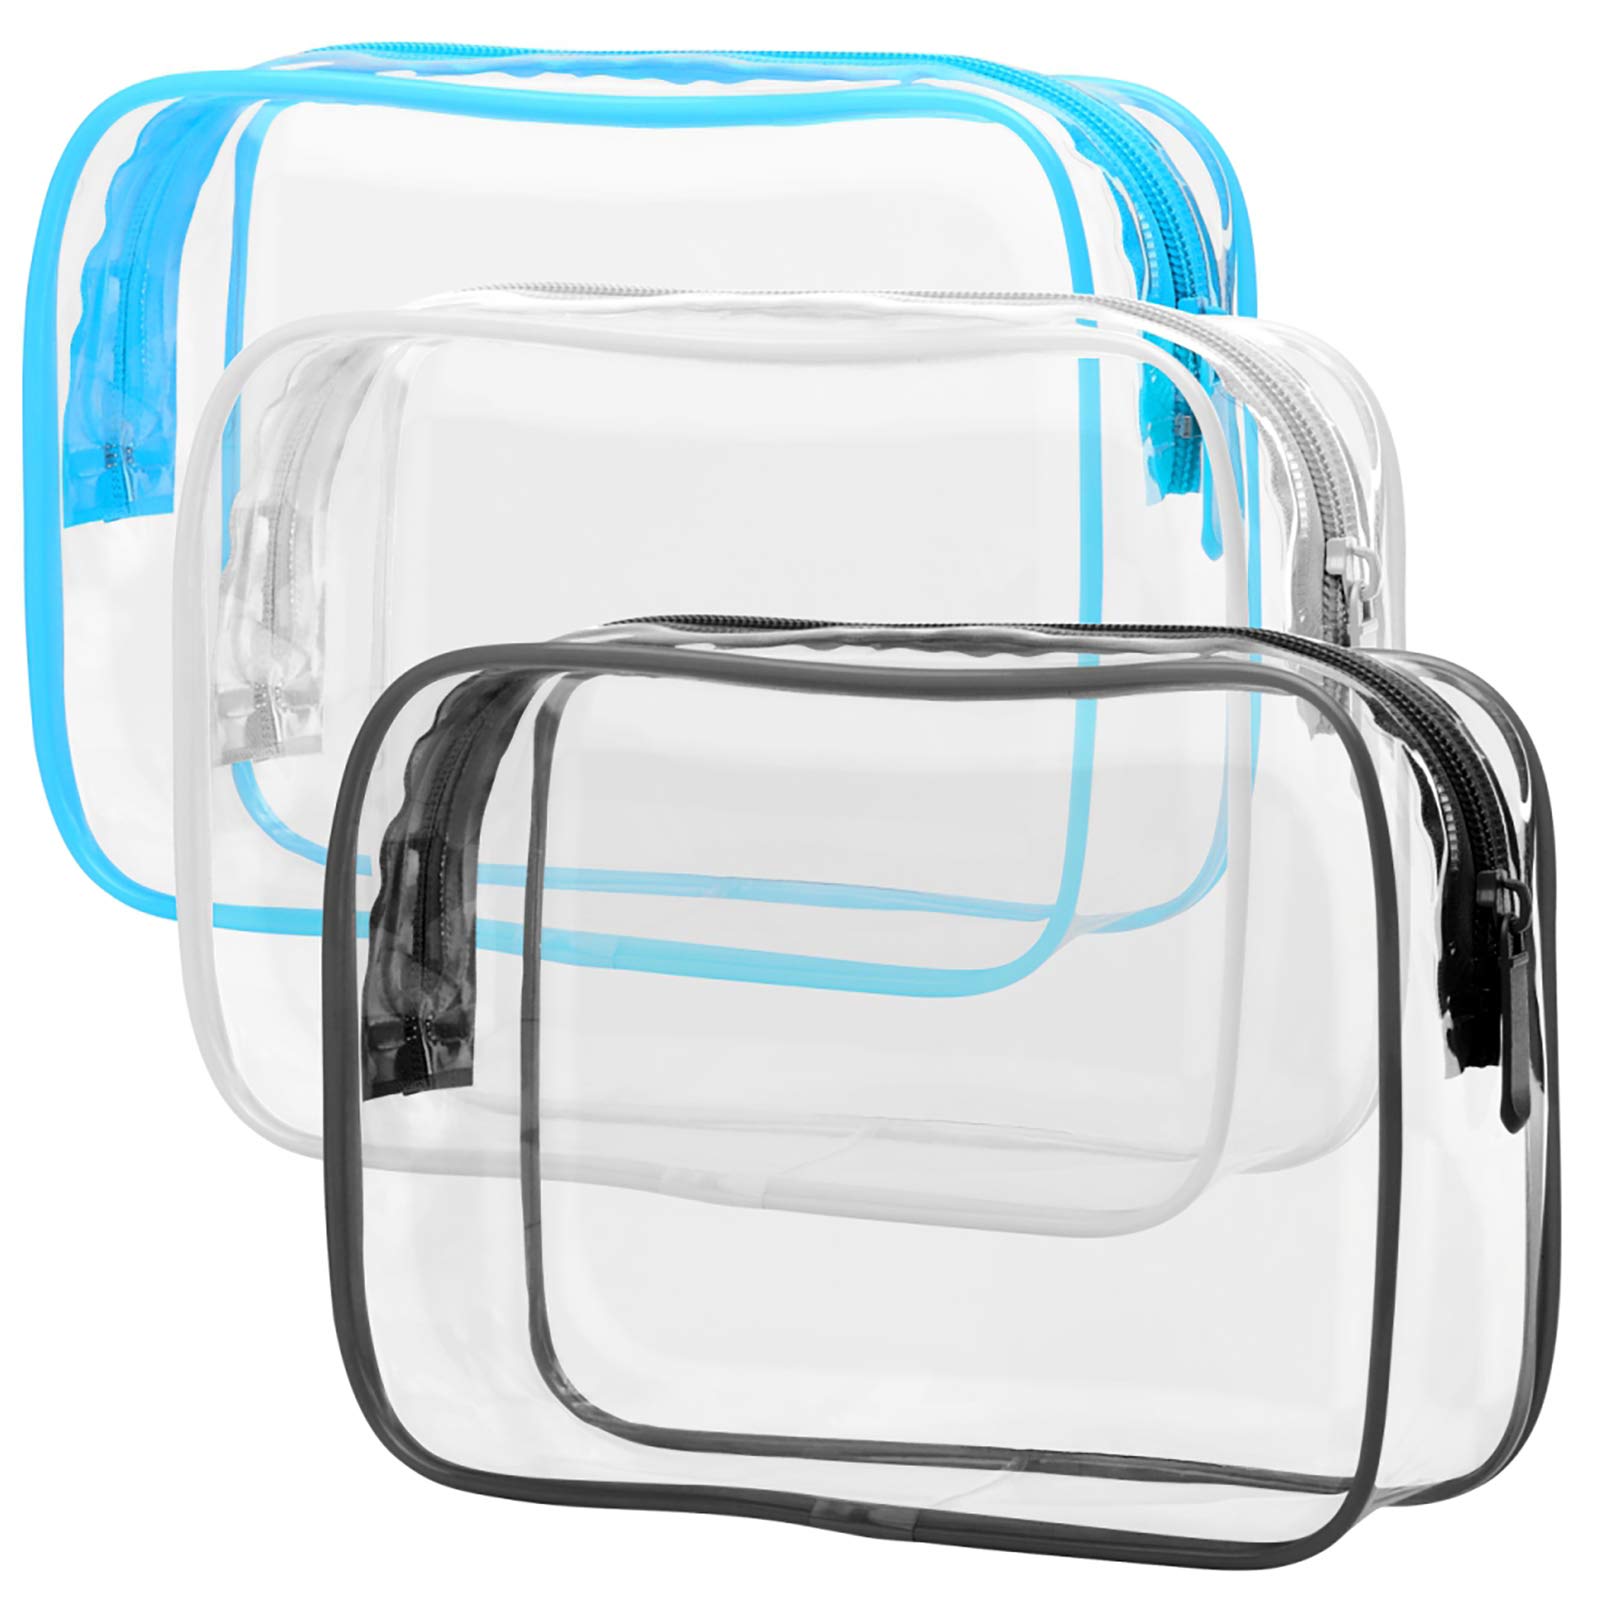 Clear toiletry clutch